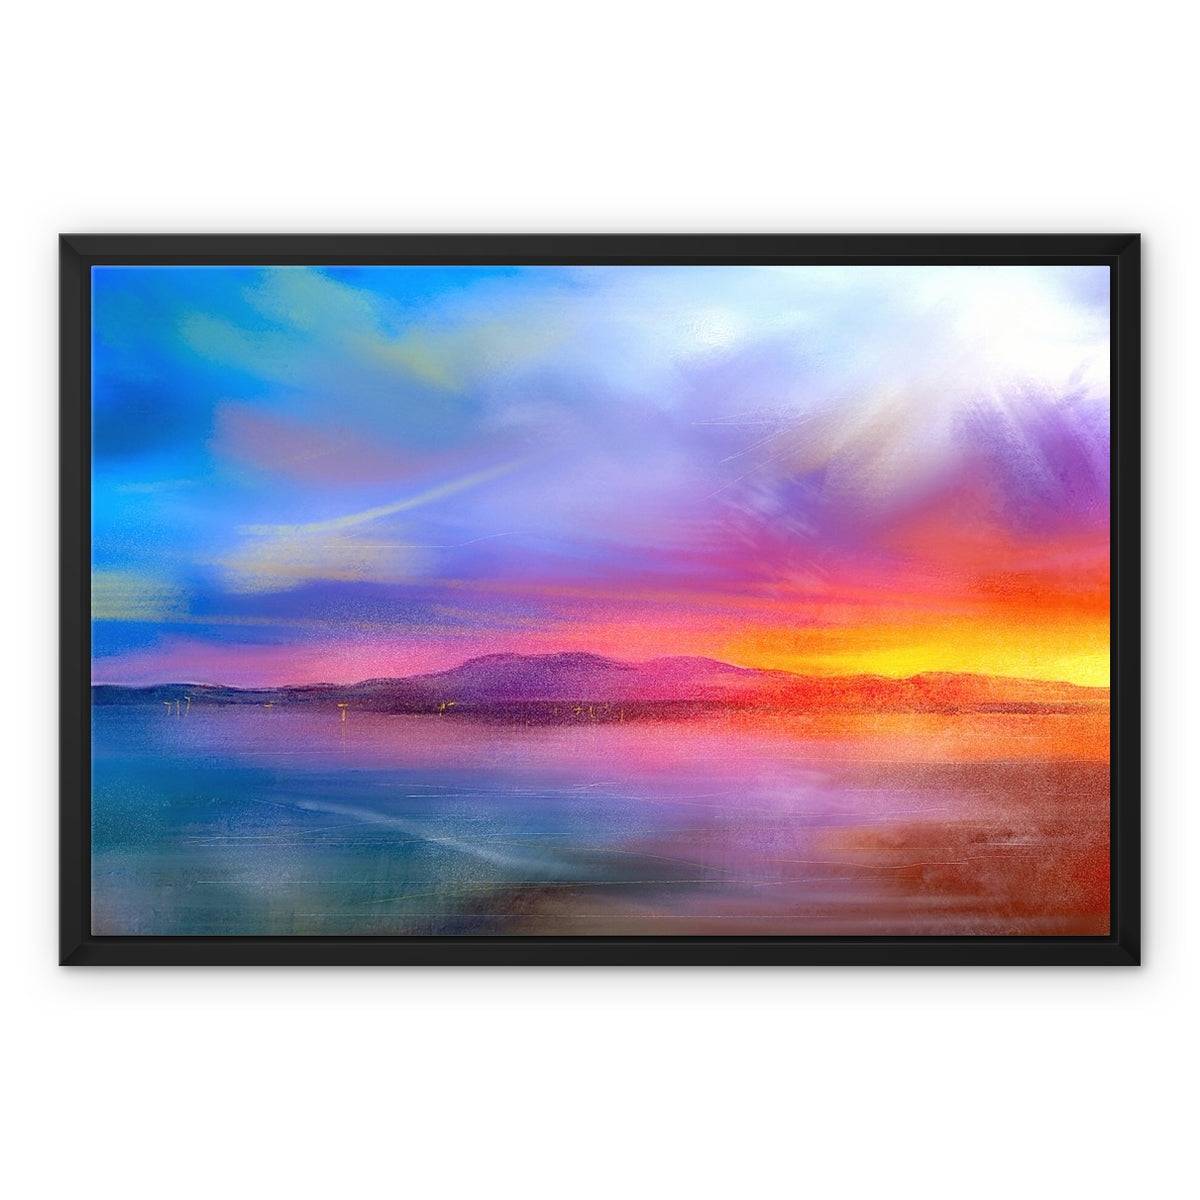 Arran Sunset Painting | Framed Canvas-Floating Framed Canvas Prints-Arran Art Gallery-24"x18"-Black Frame-Paintings, Prints, Homeware, Art Gifts From Scotland By Scottish Artist Kevin Hunter